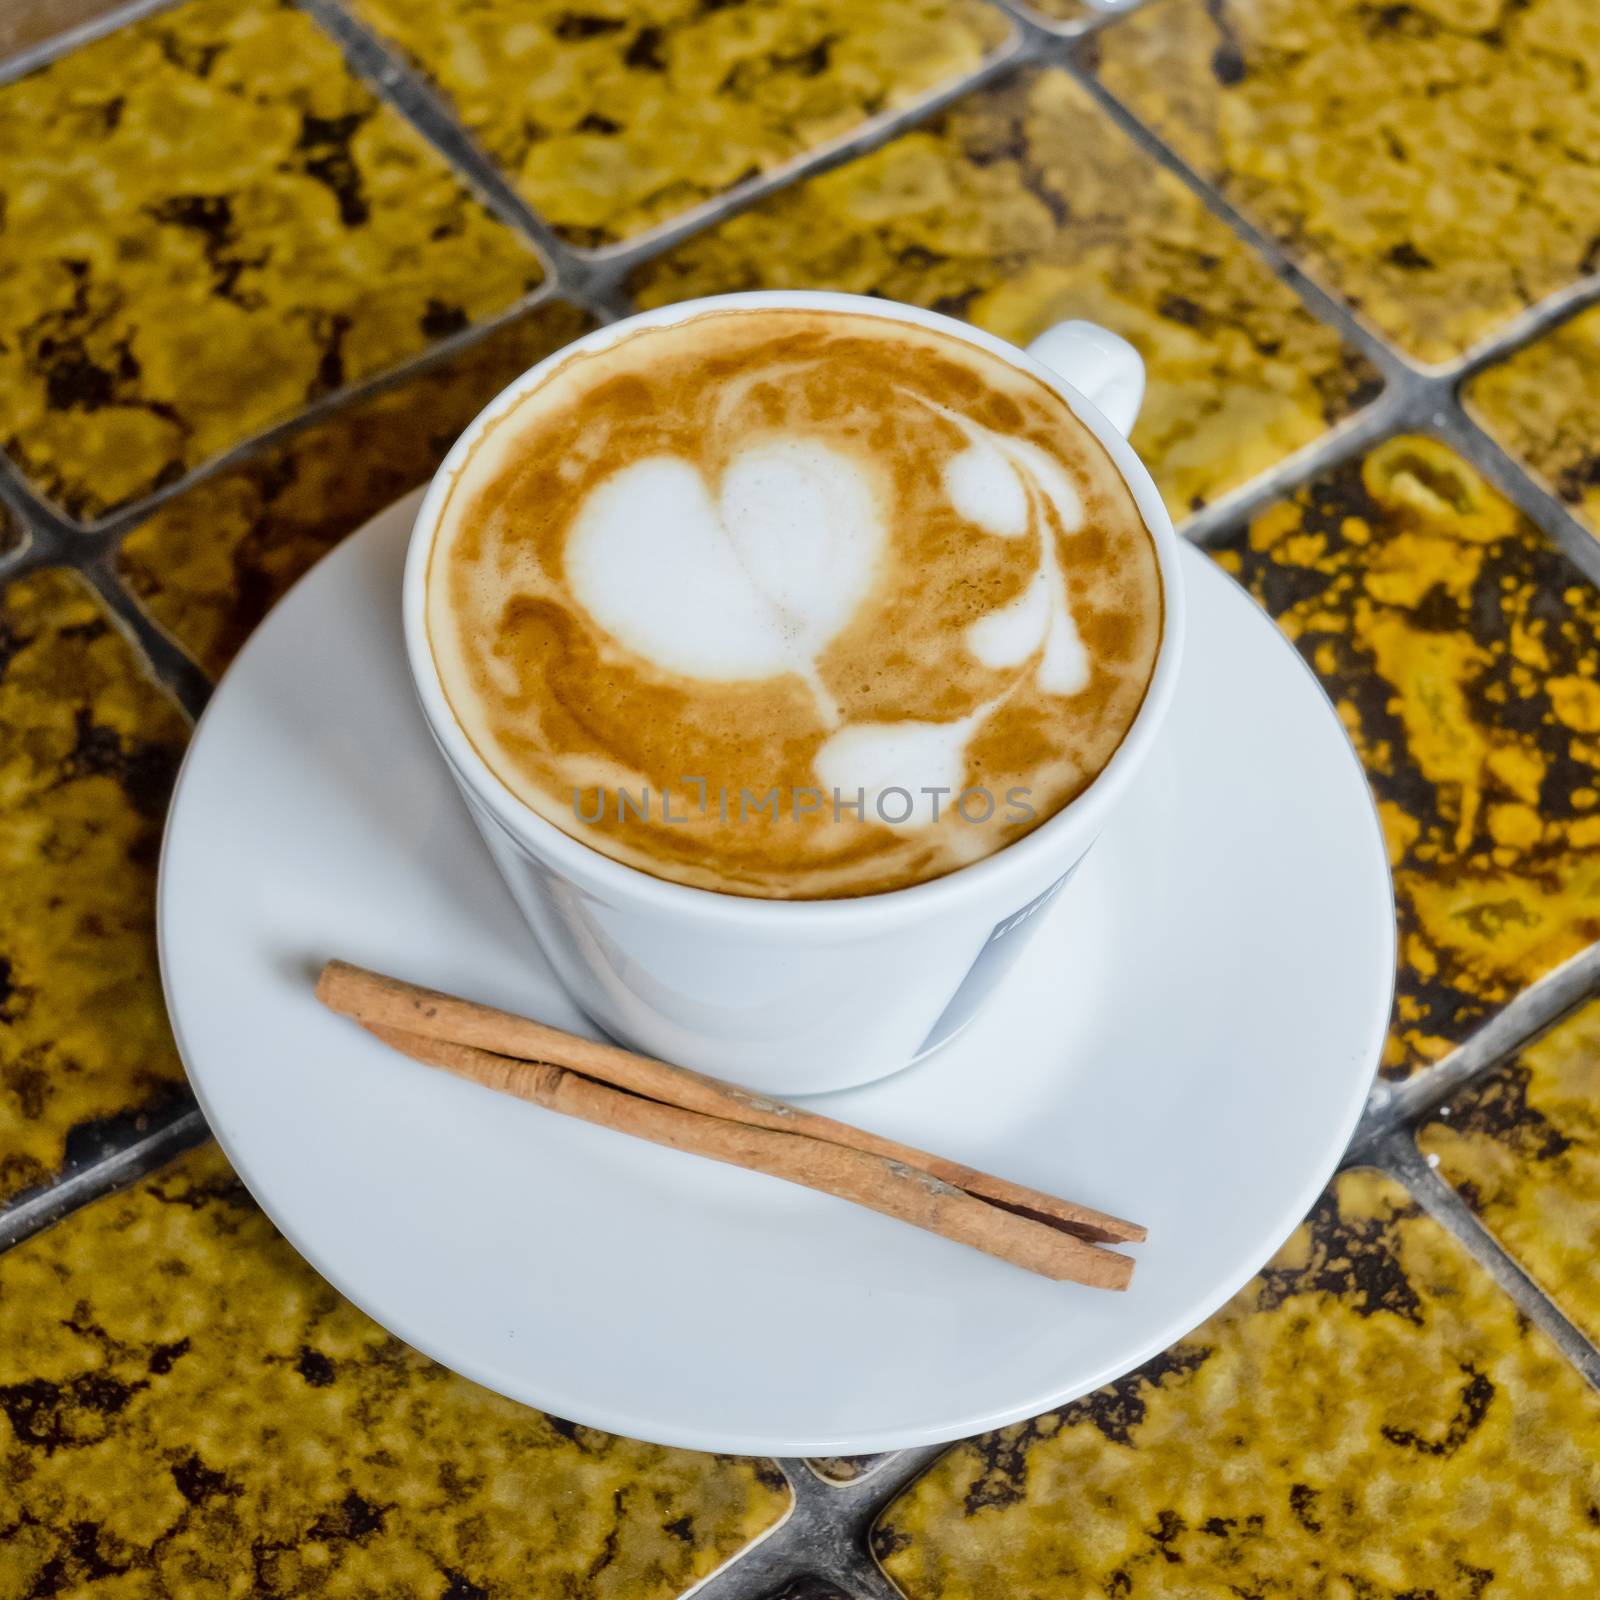 A cup of cafe latte and Cinnamon stick. by art9858